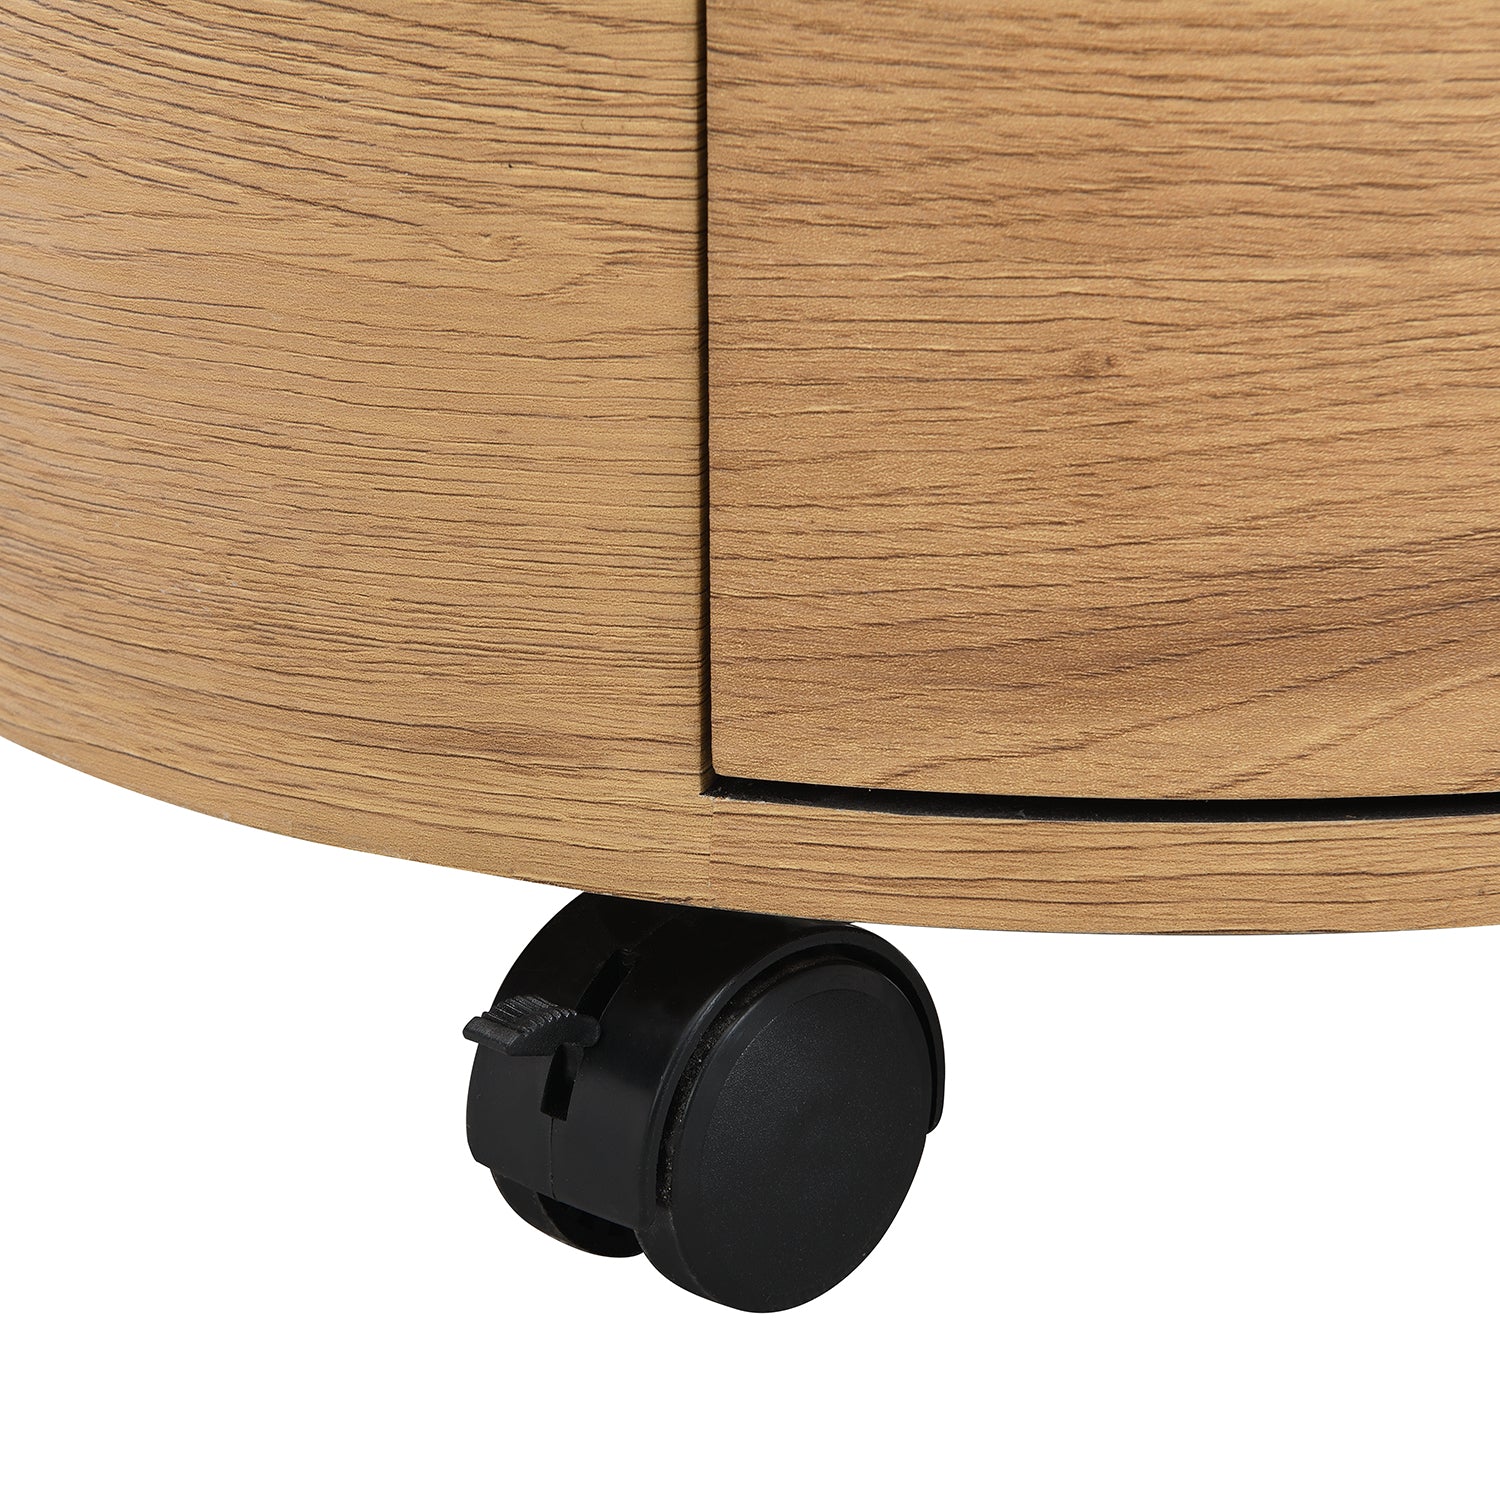 DOLIO Drum Chest Bedside Table, Barrel Side Table with Drawers Oak 3 Drawer